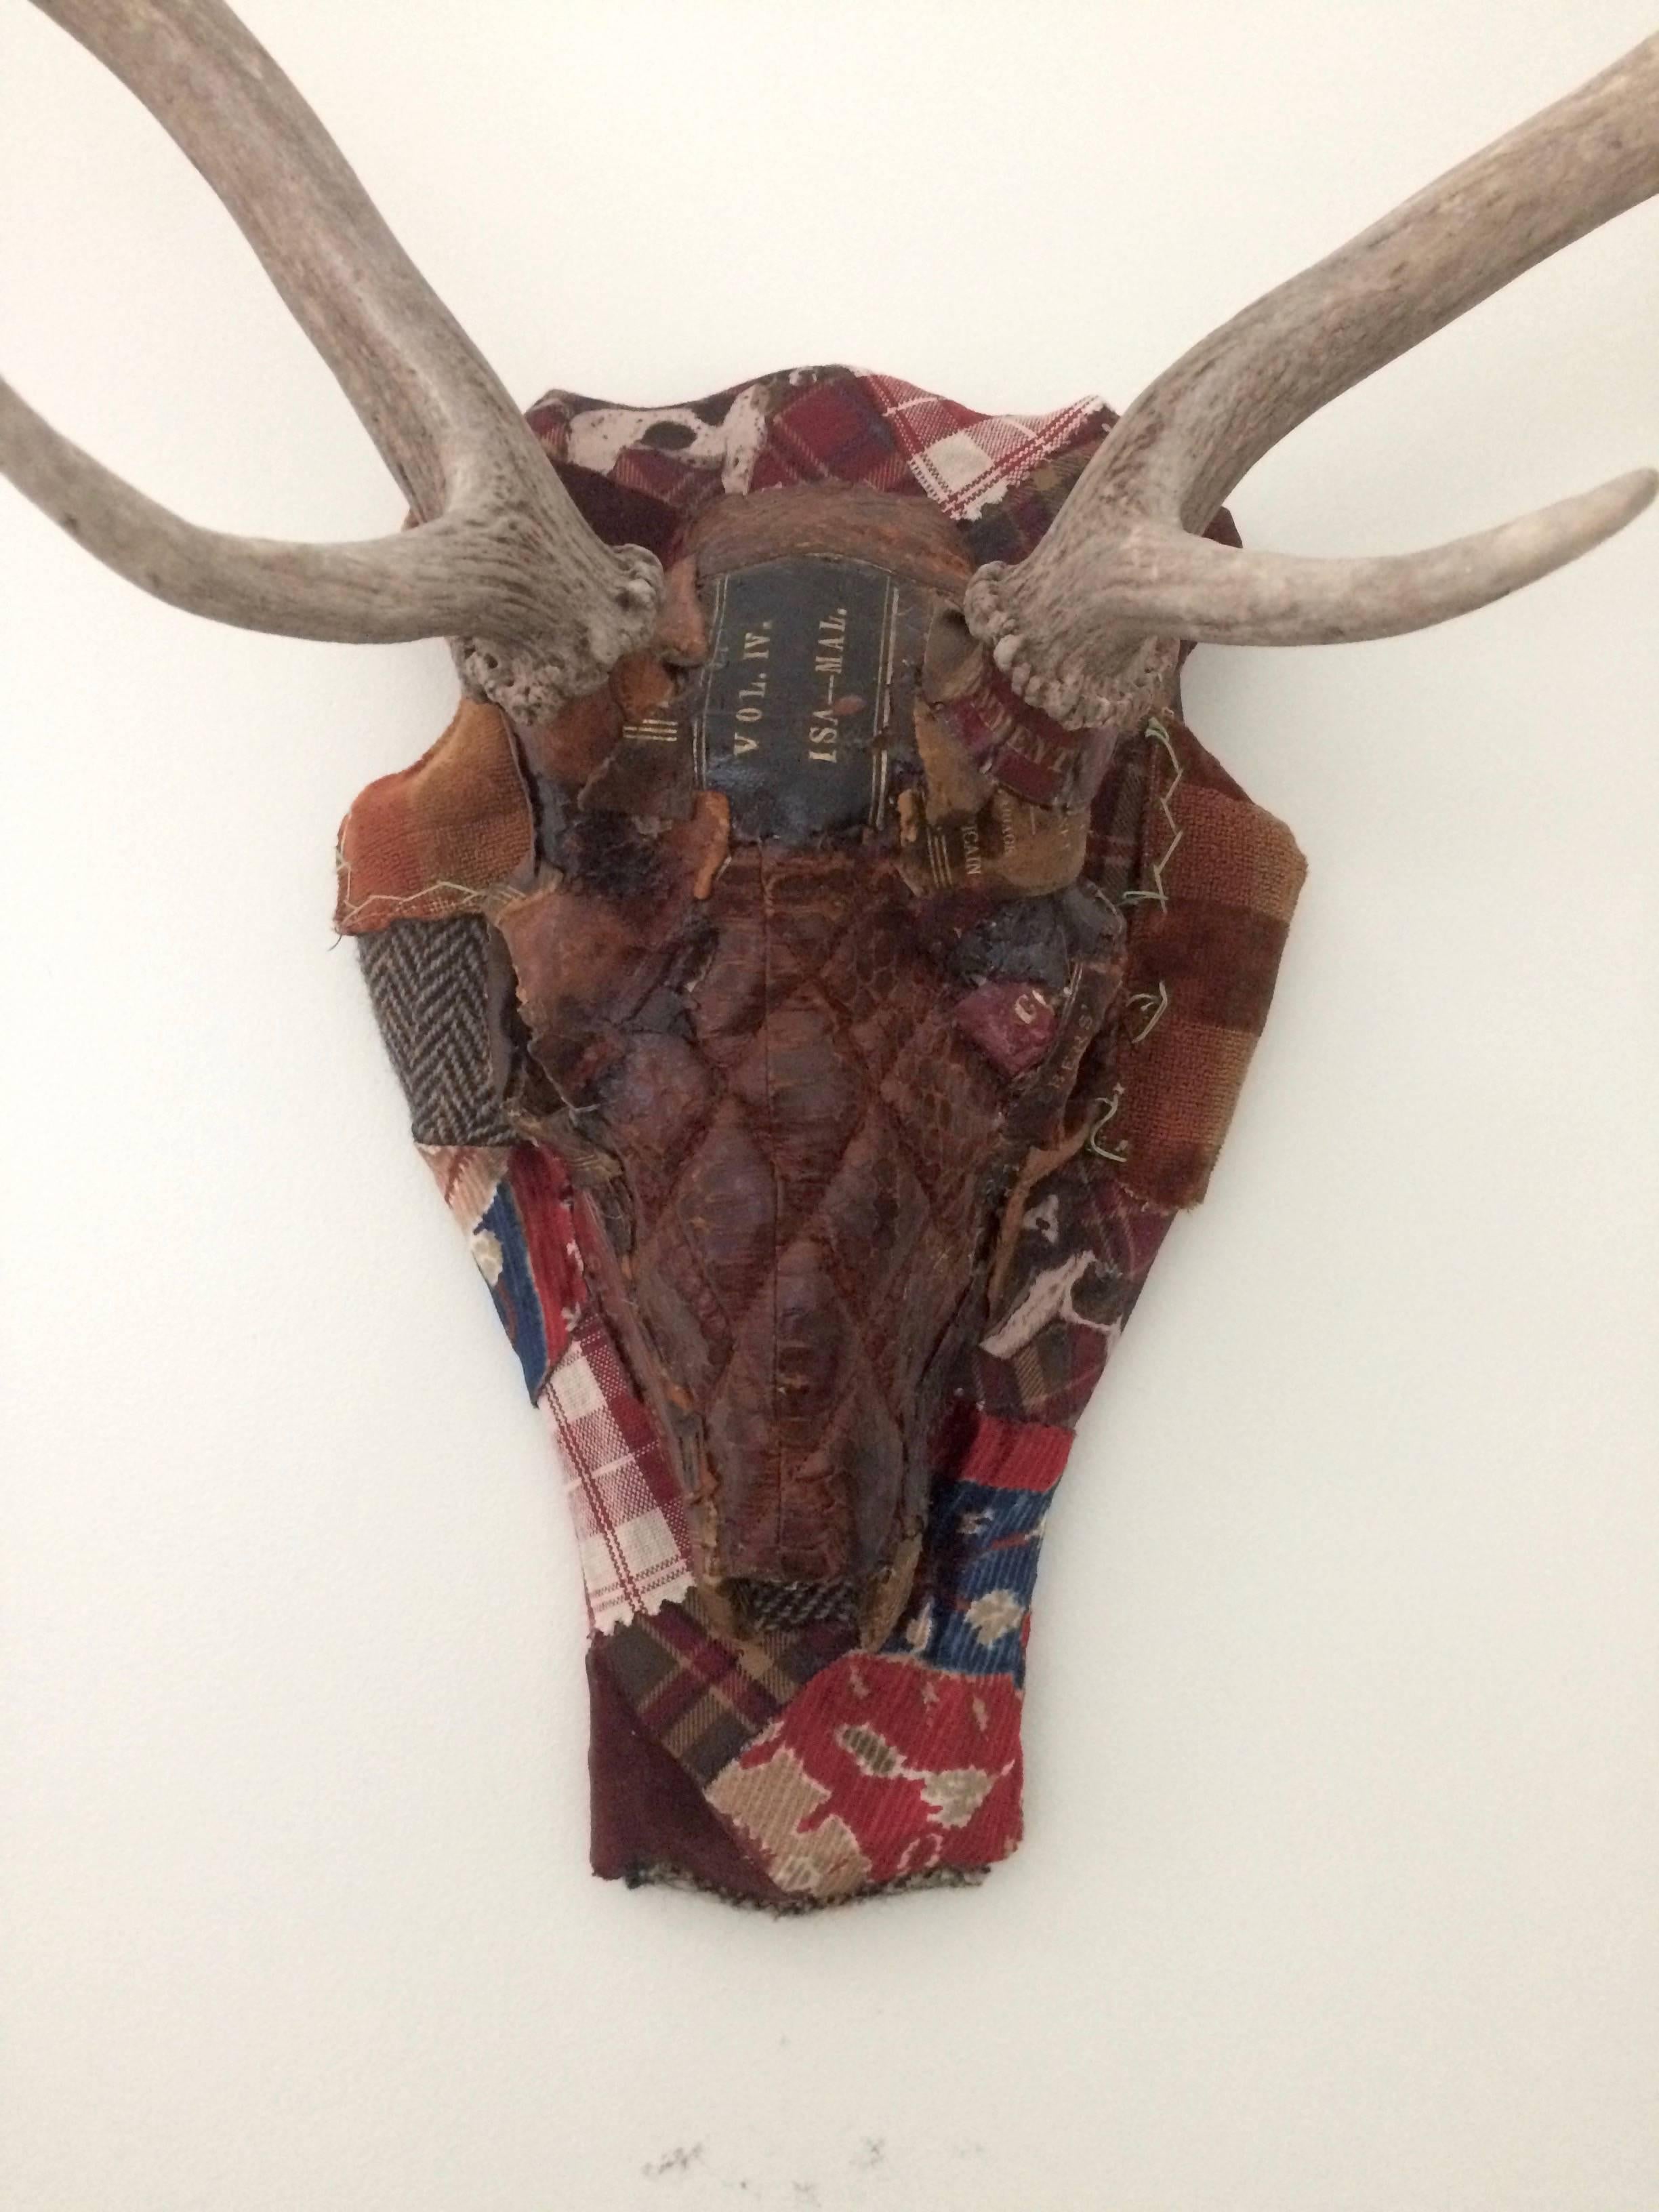 Richly layered mixed media skull sculpture using an imaginative array of textural elements including vestiges from a vintage quilted leather handbag, bits and pieces of leather books, Ralph Lauren plaids and cordoroy and cuttings from an old crazy